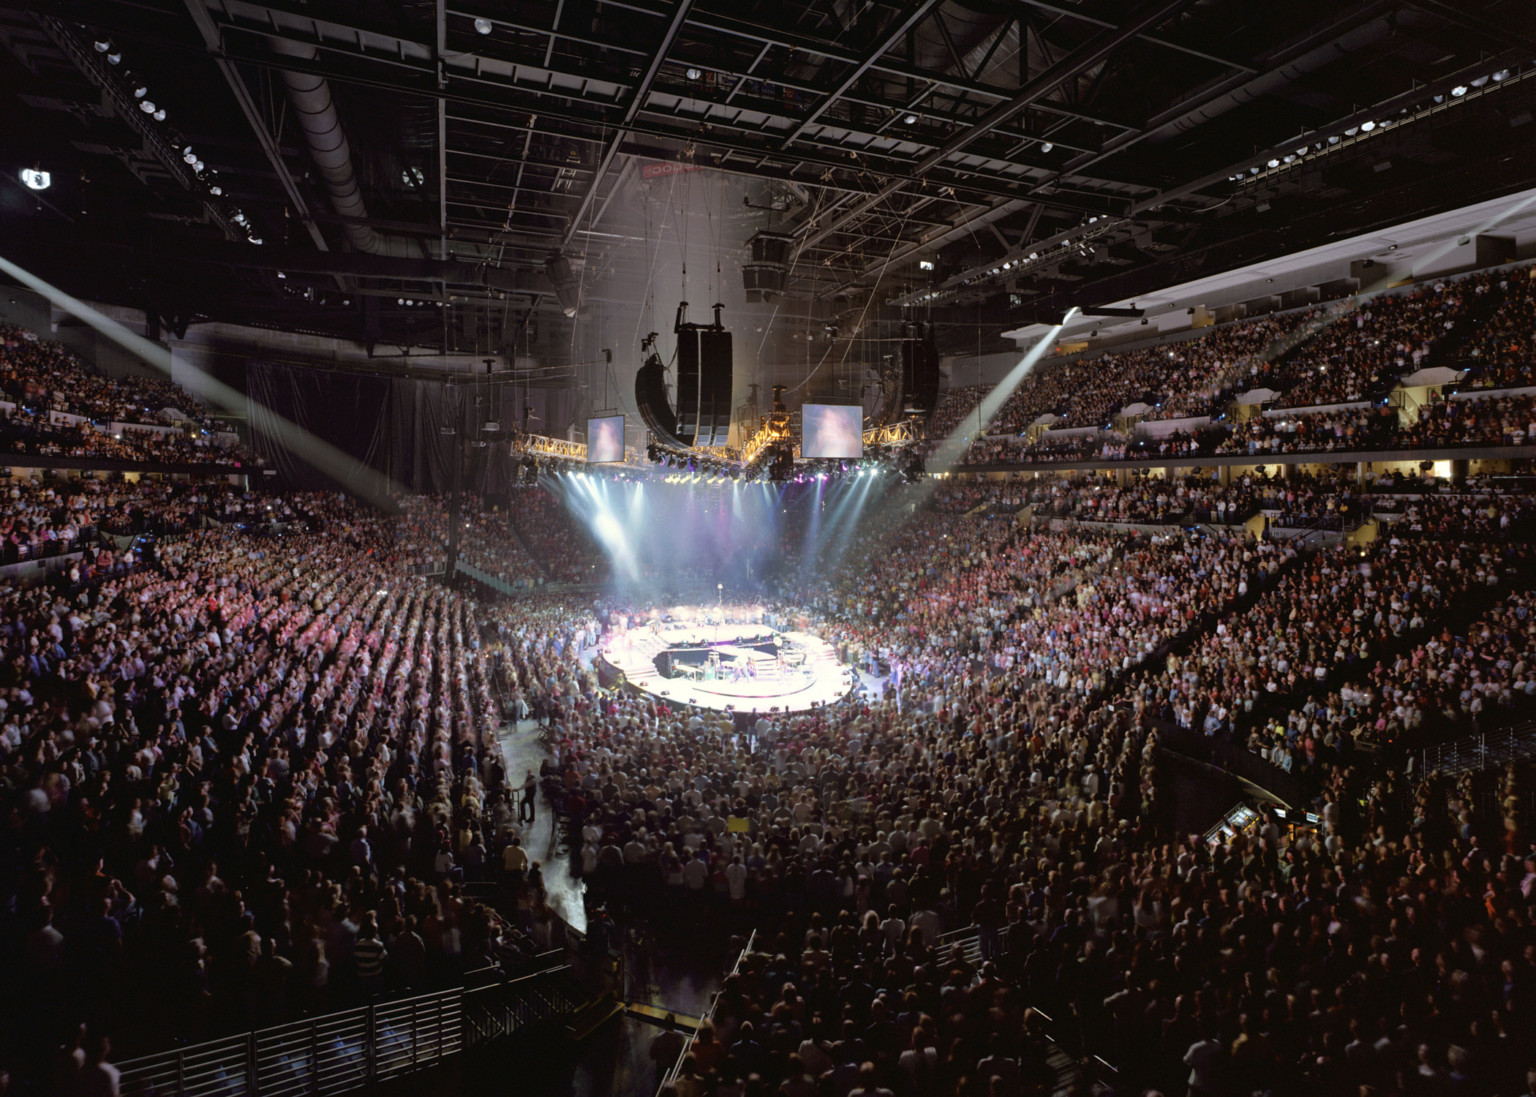 Chi Health Center Omaha interior event and sporting venue. Stadium seating filled during a concert performance with lighting above